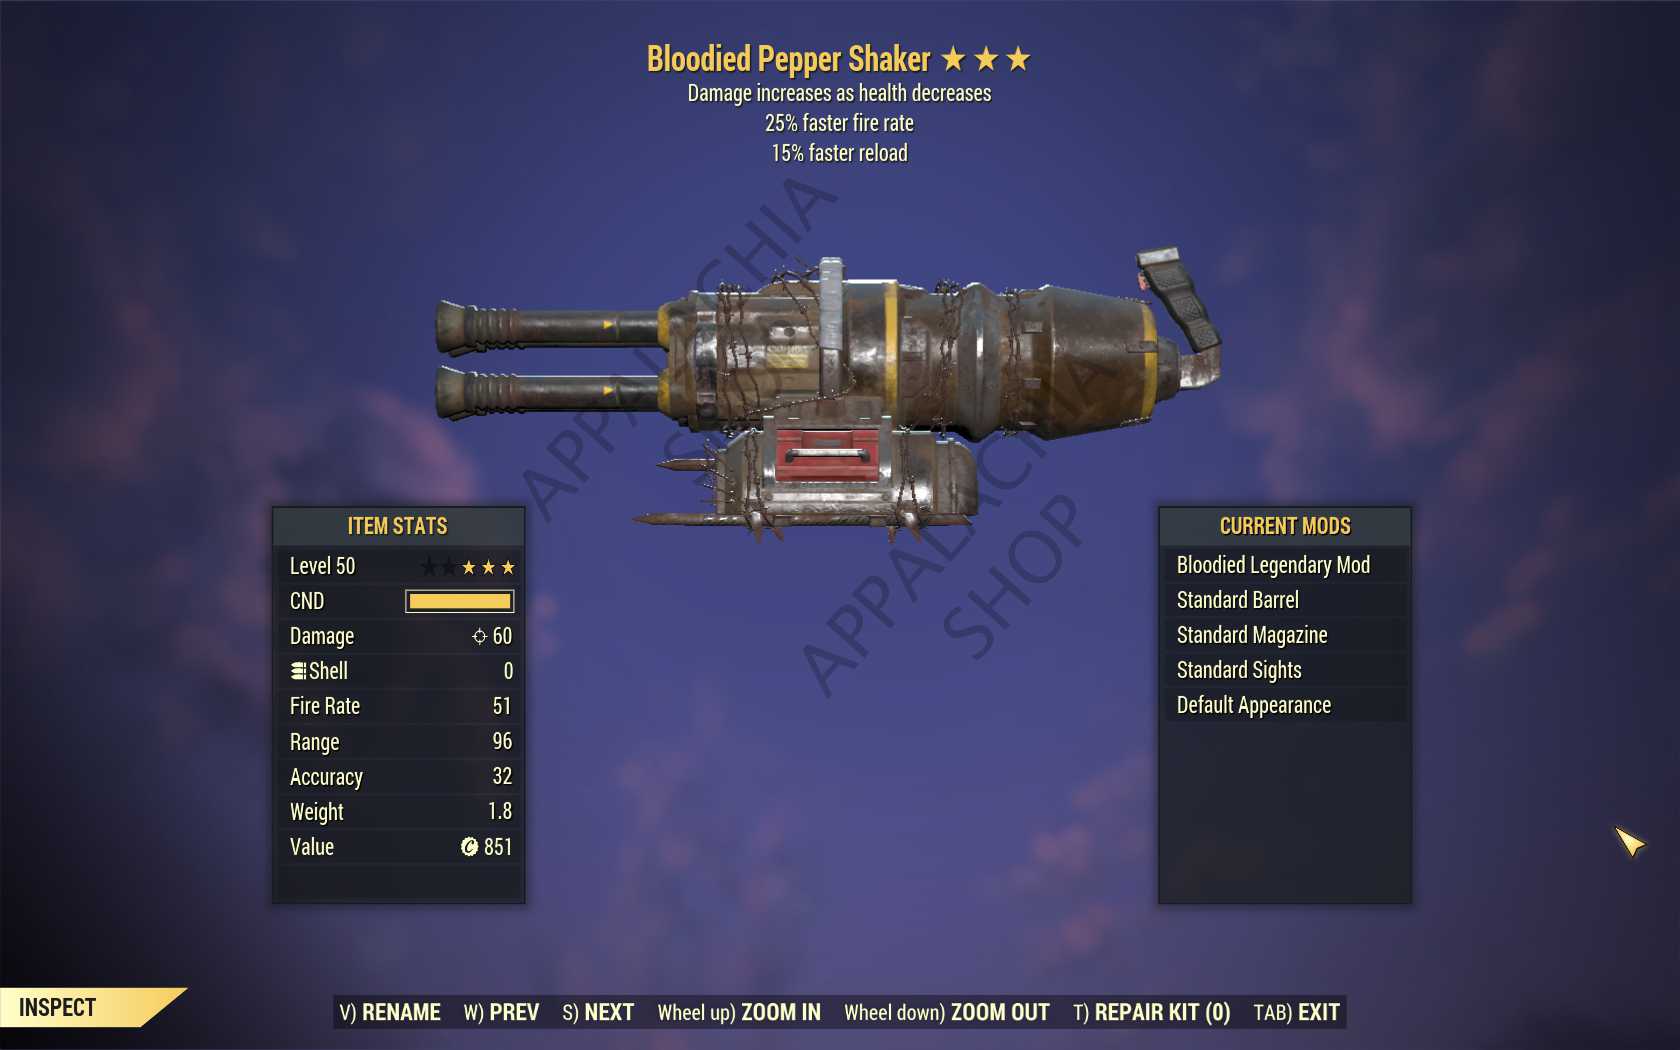 Bloodied Pepper Shaker (25% faster fire rate, 15% faster reload)